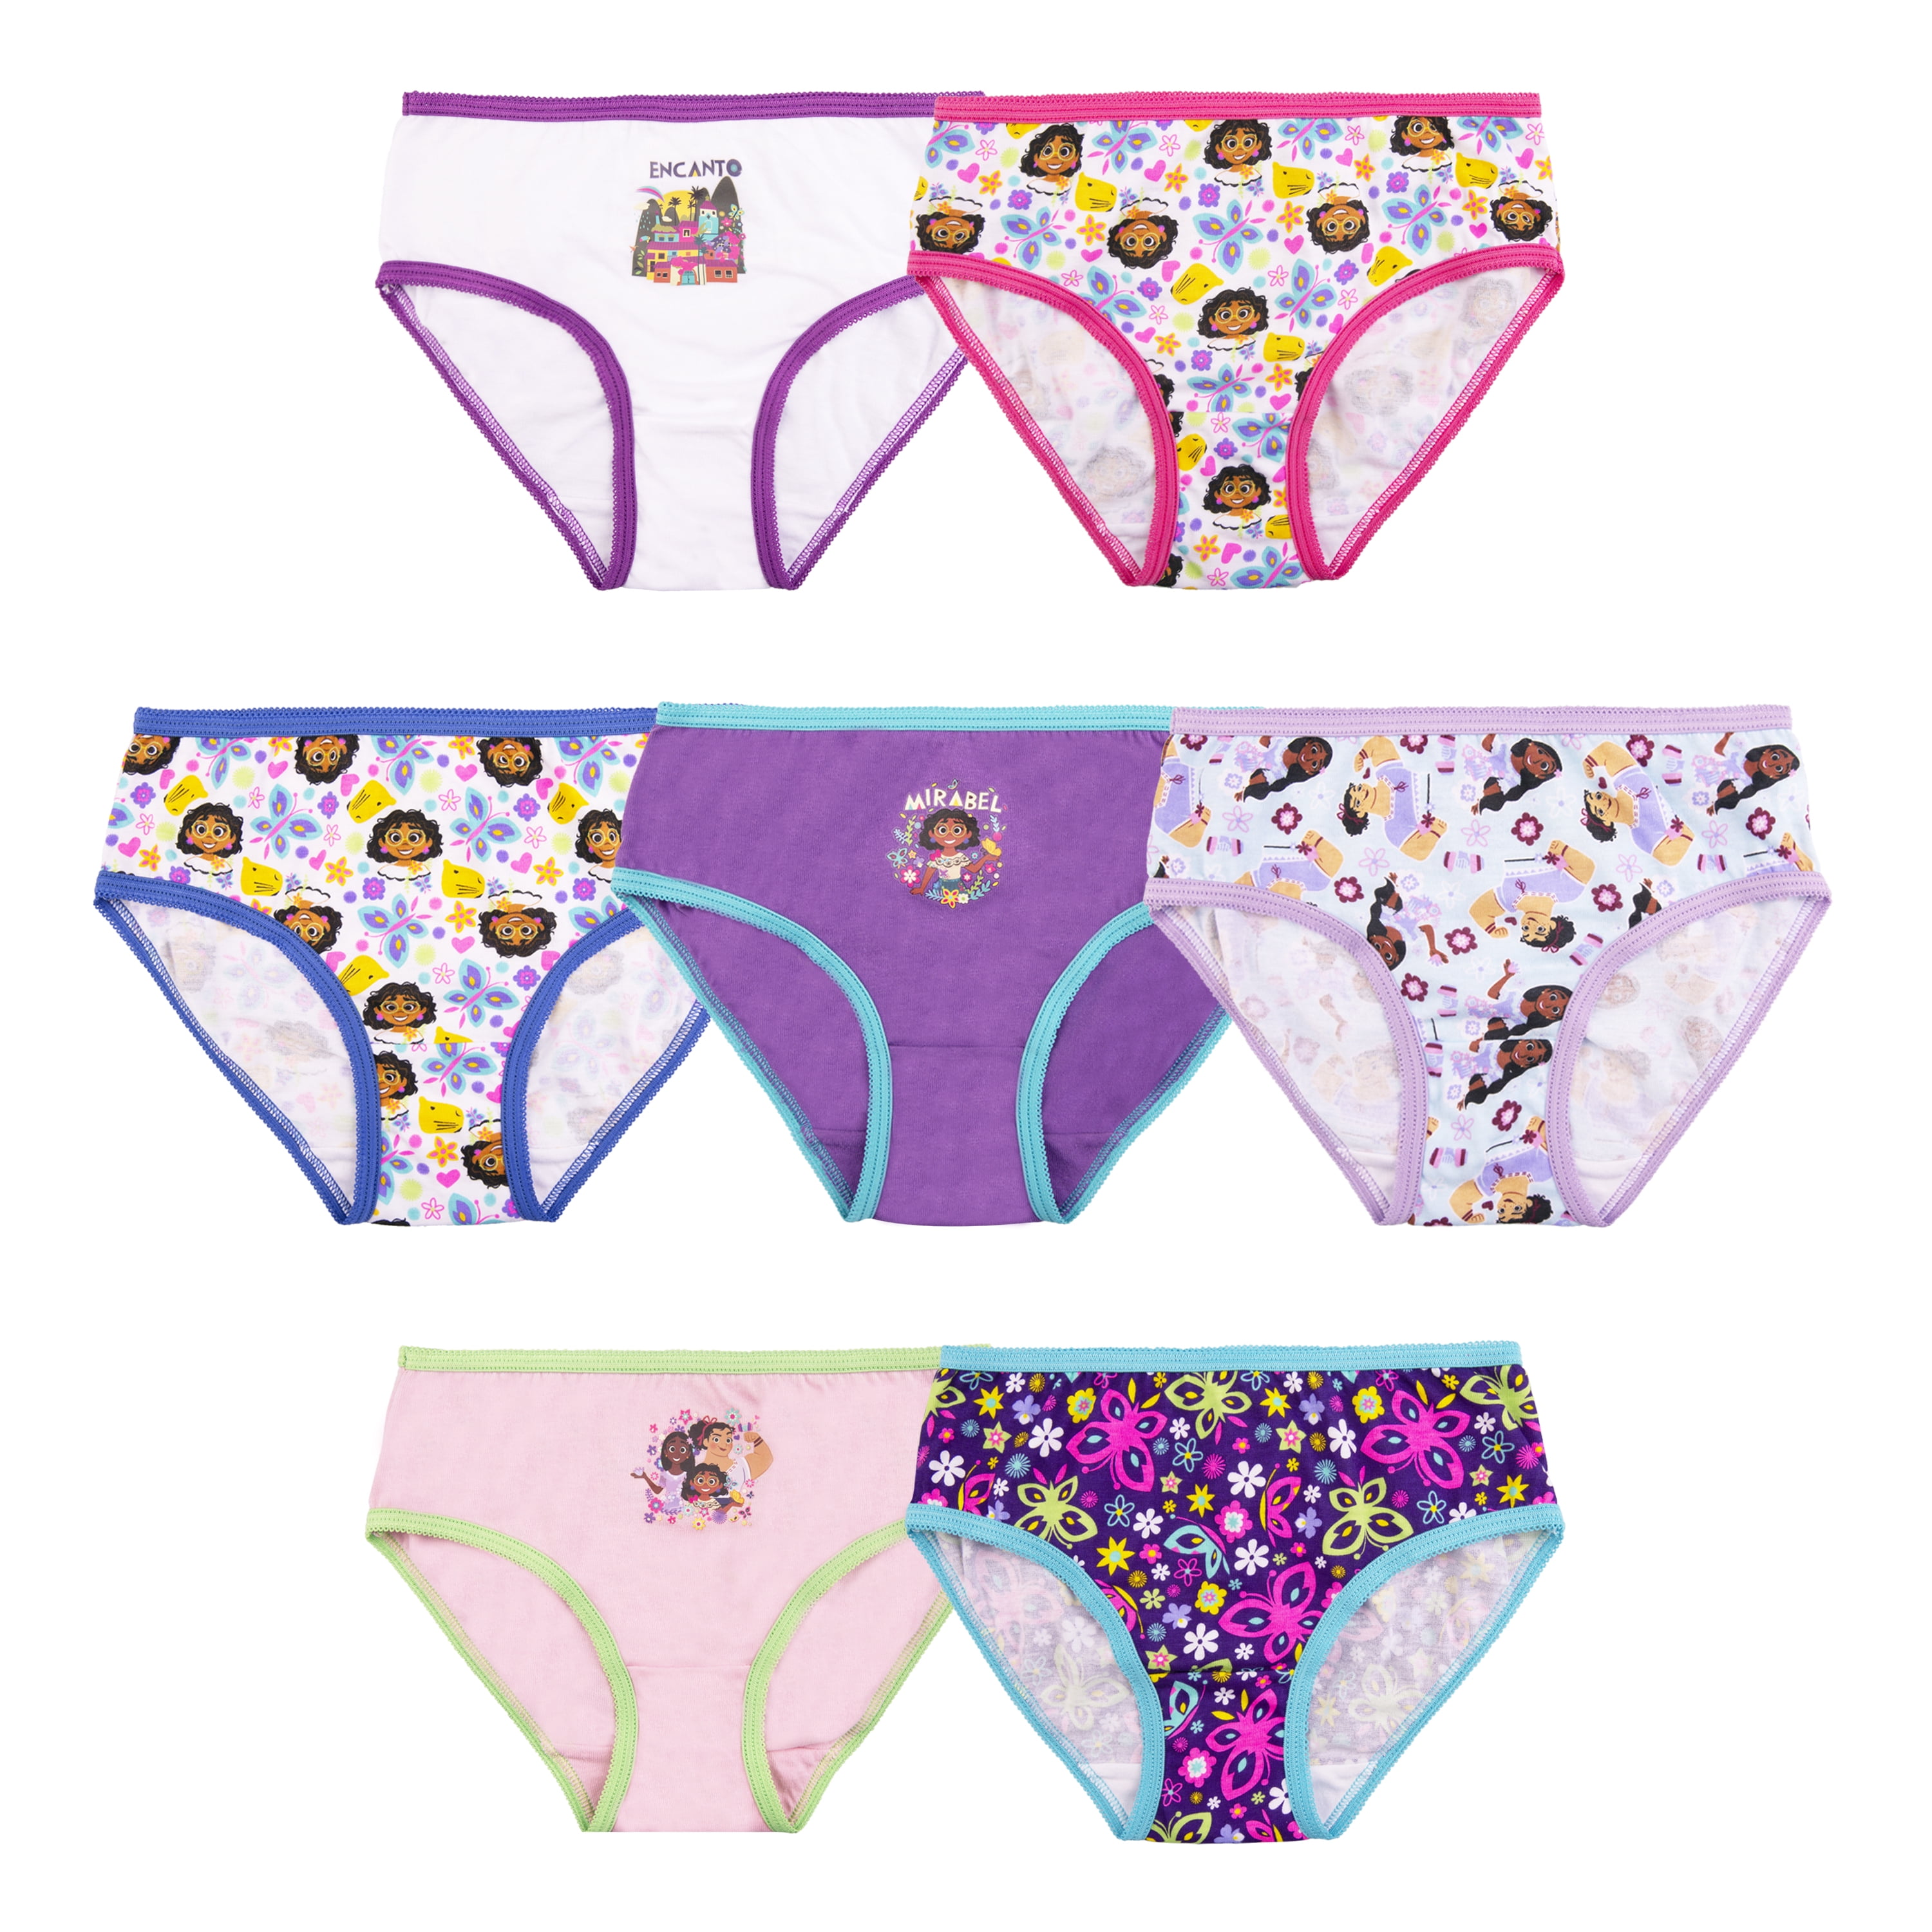 Disney Girls Knickers Pack of 5 Encanto Multicolour 4-5 Years